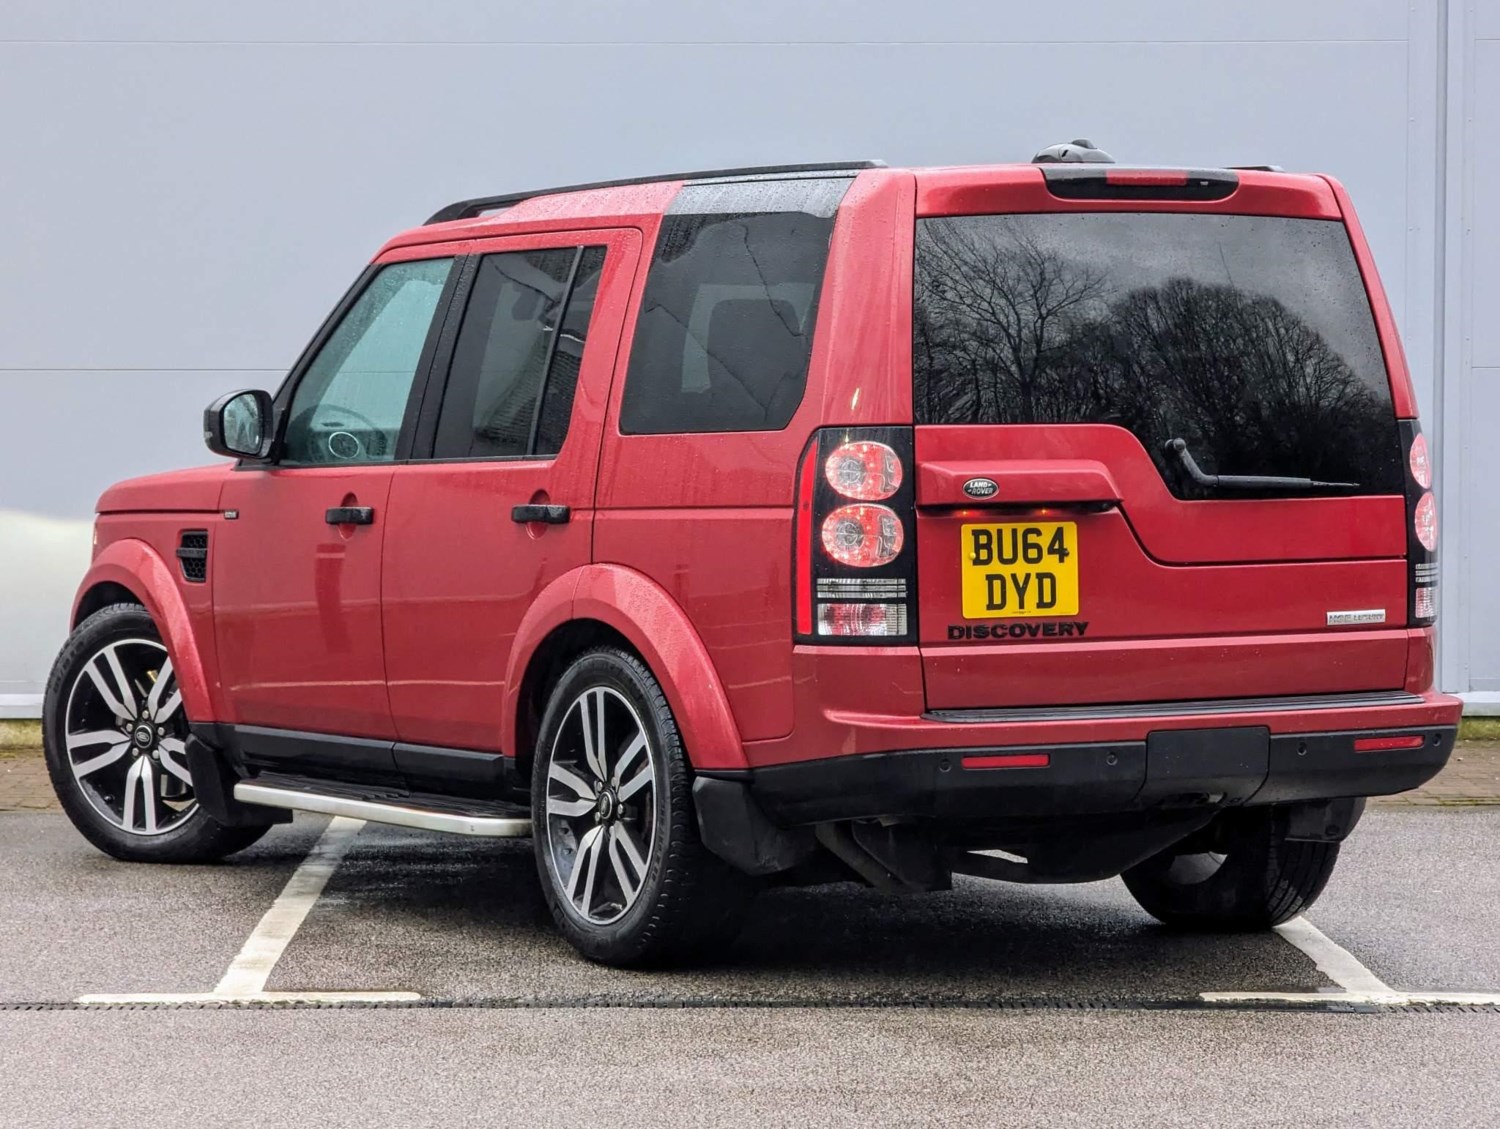 Land Rover Discovery Listing Image